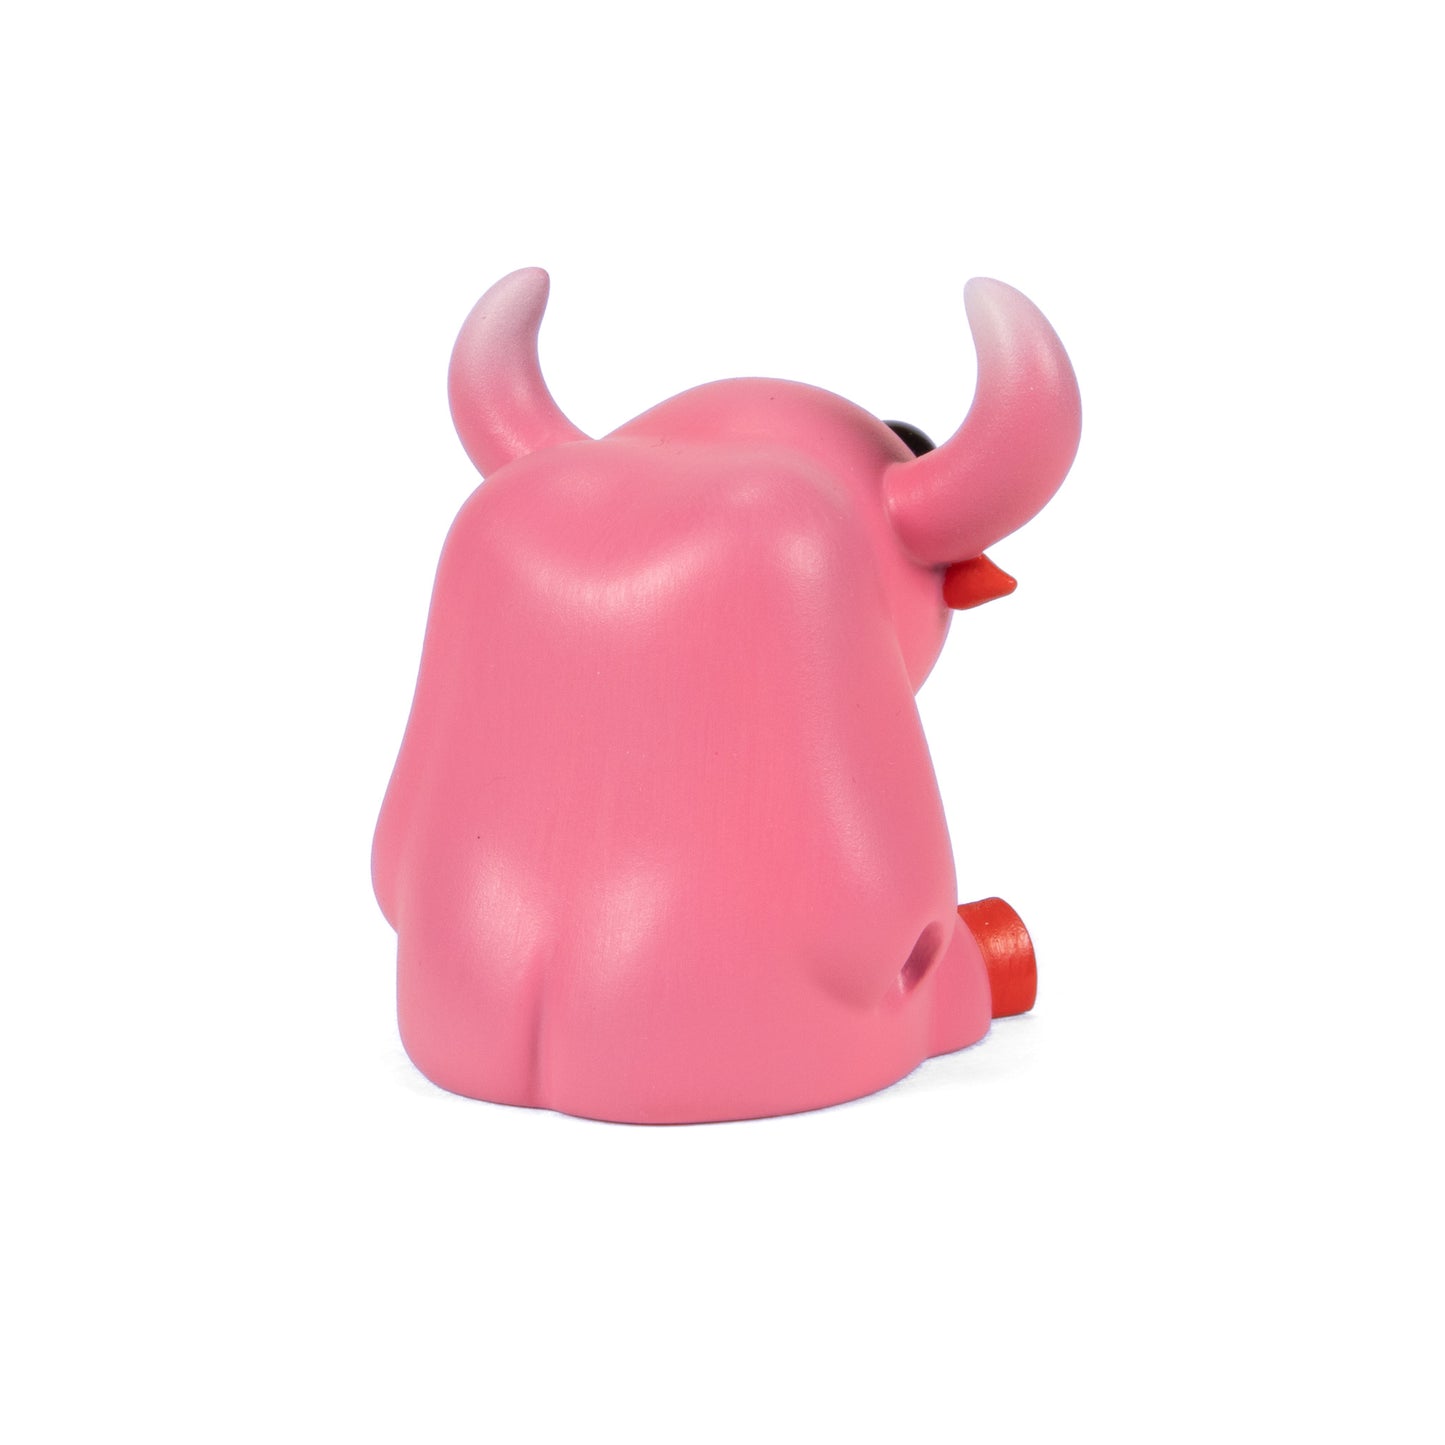 Clove the Bull Grazing For Love Limited Edition Hand-Painted Resin Figure